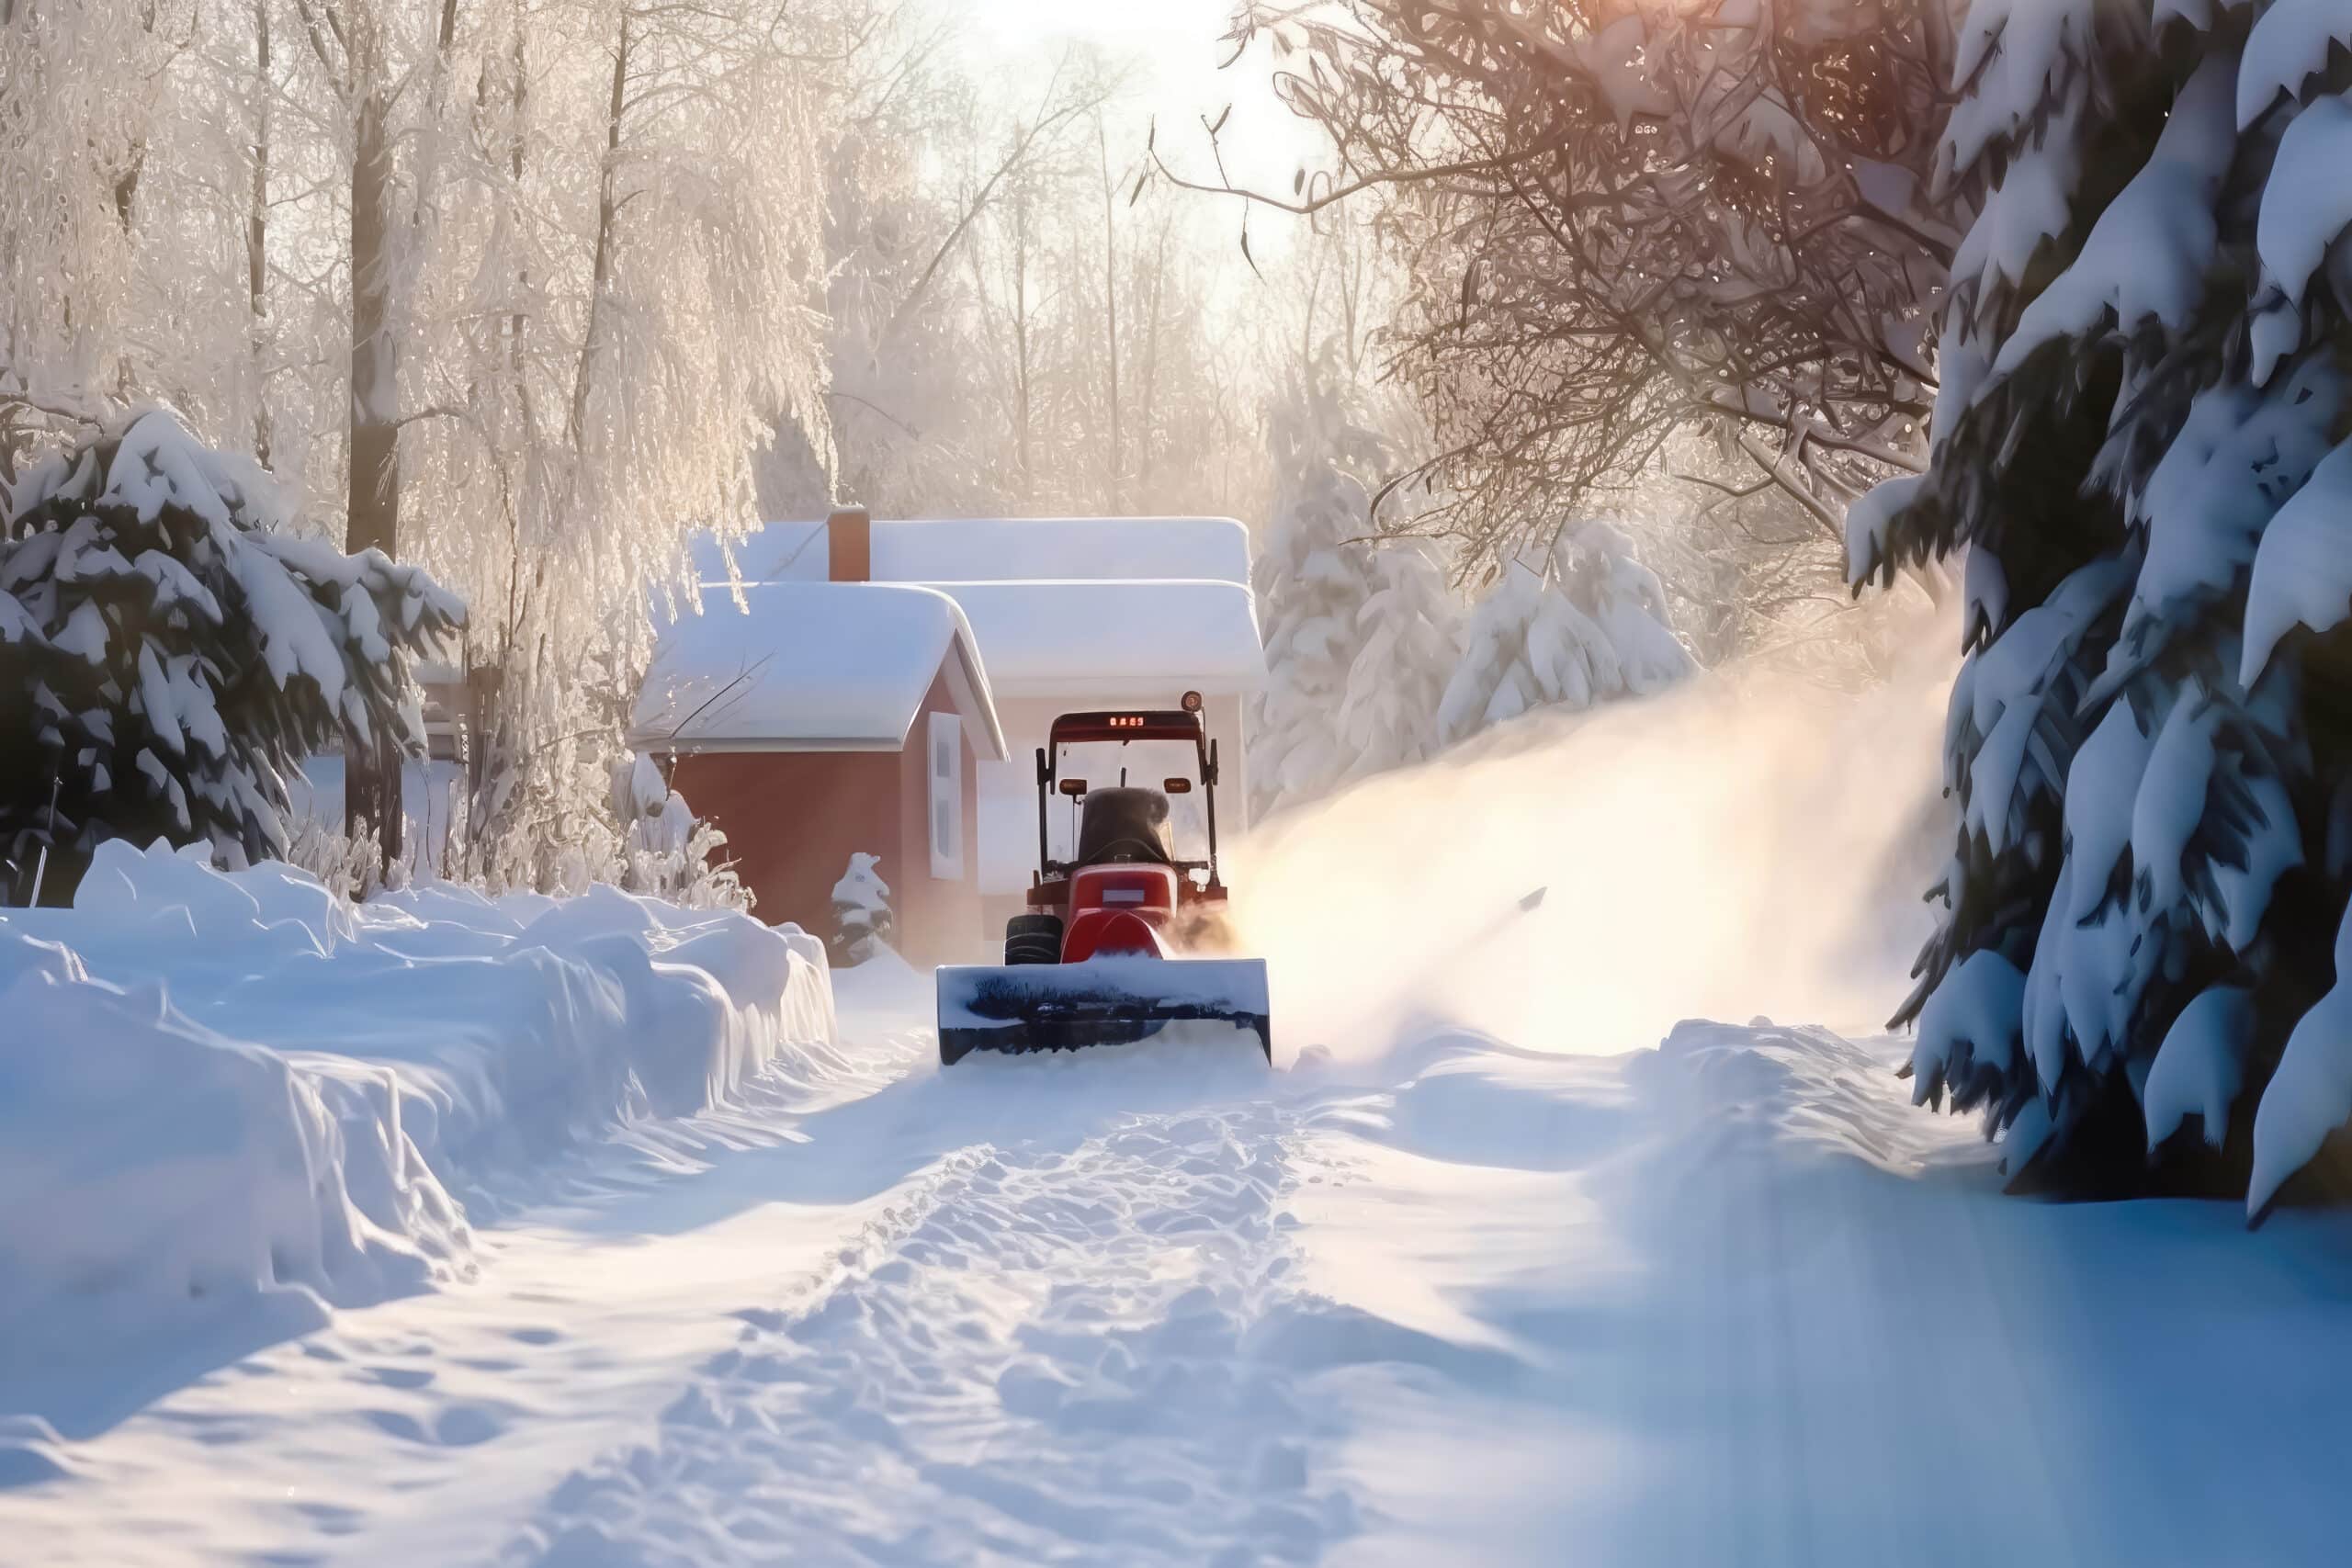 www.appr.com : What differentiates single from two-stage snow blowers?